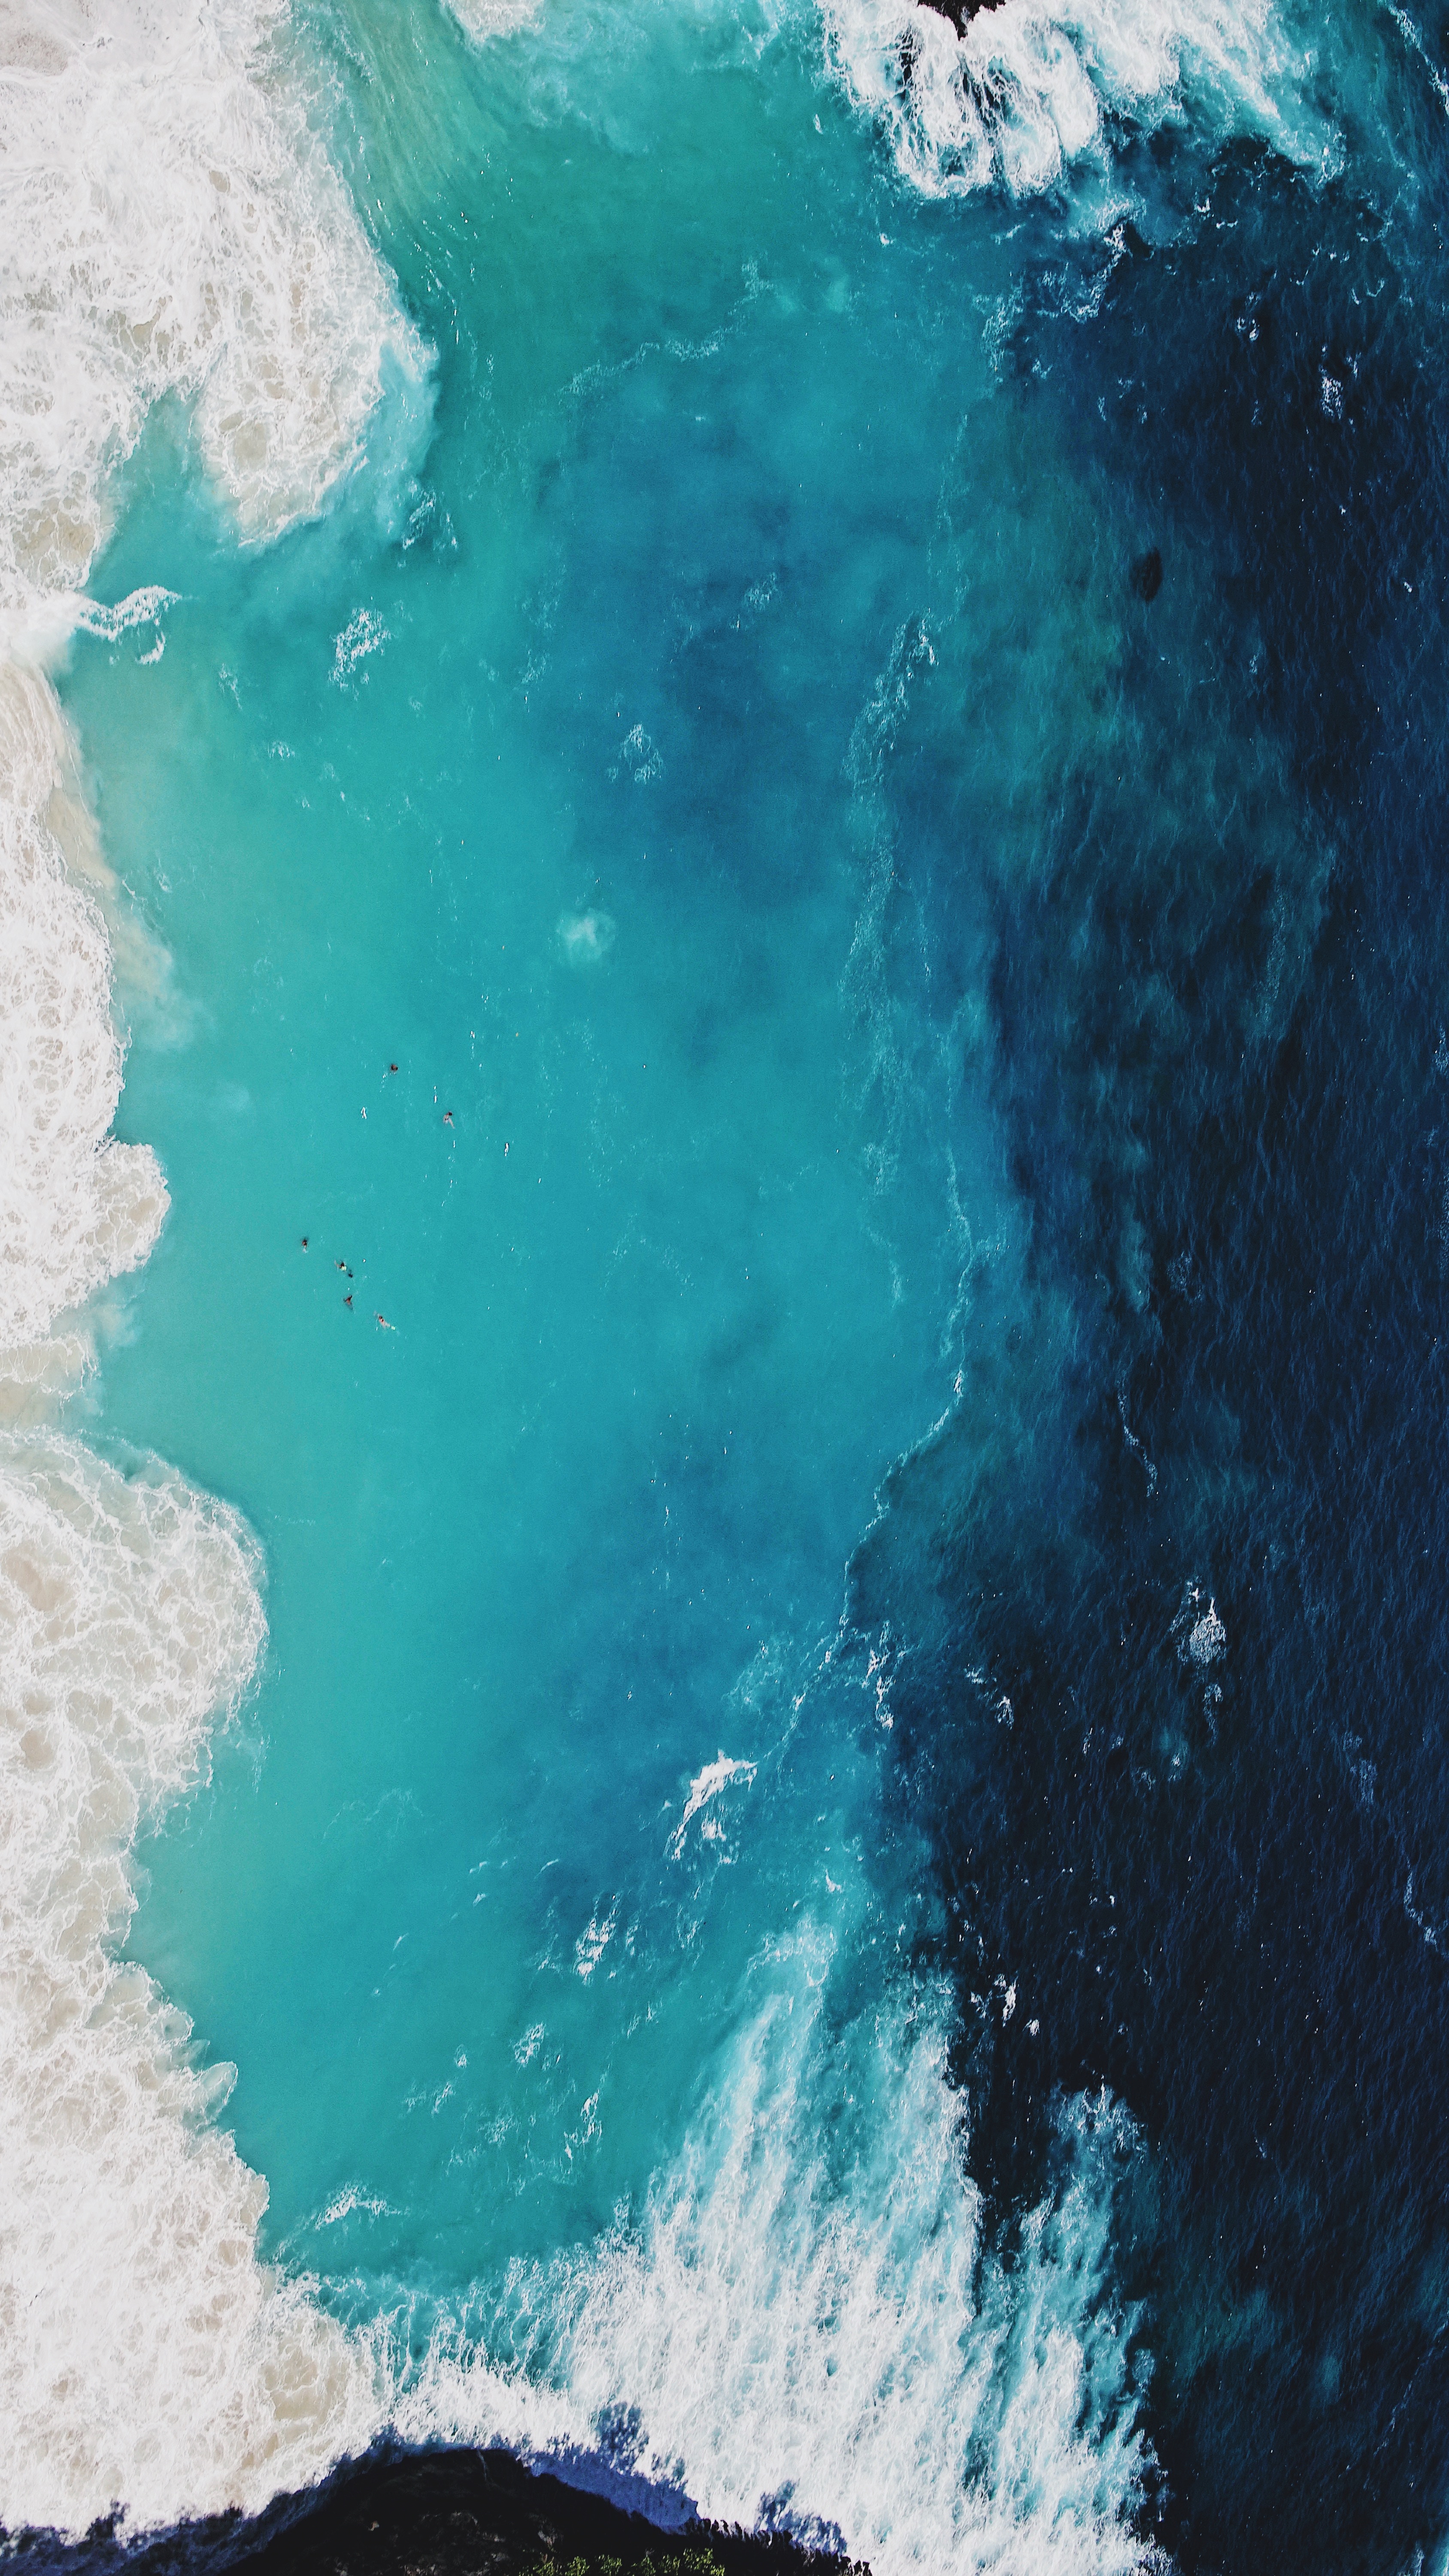 150458 download wallpaper ocean, nature, water, waves, view from above, foam, surf screensavers and pictures for free